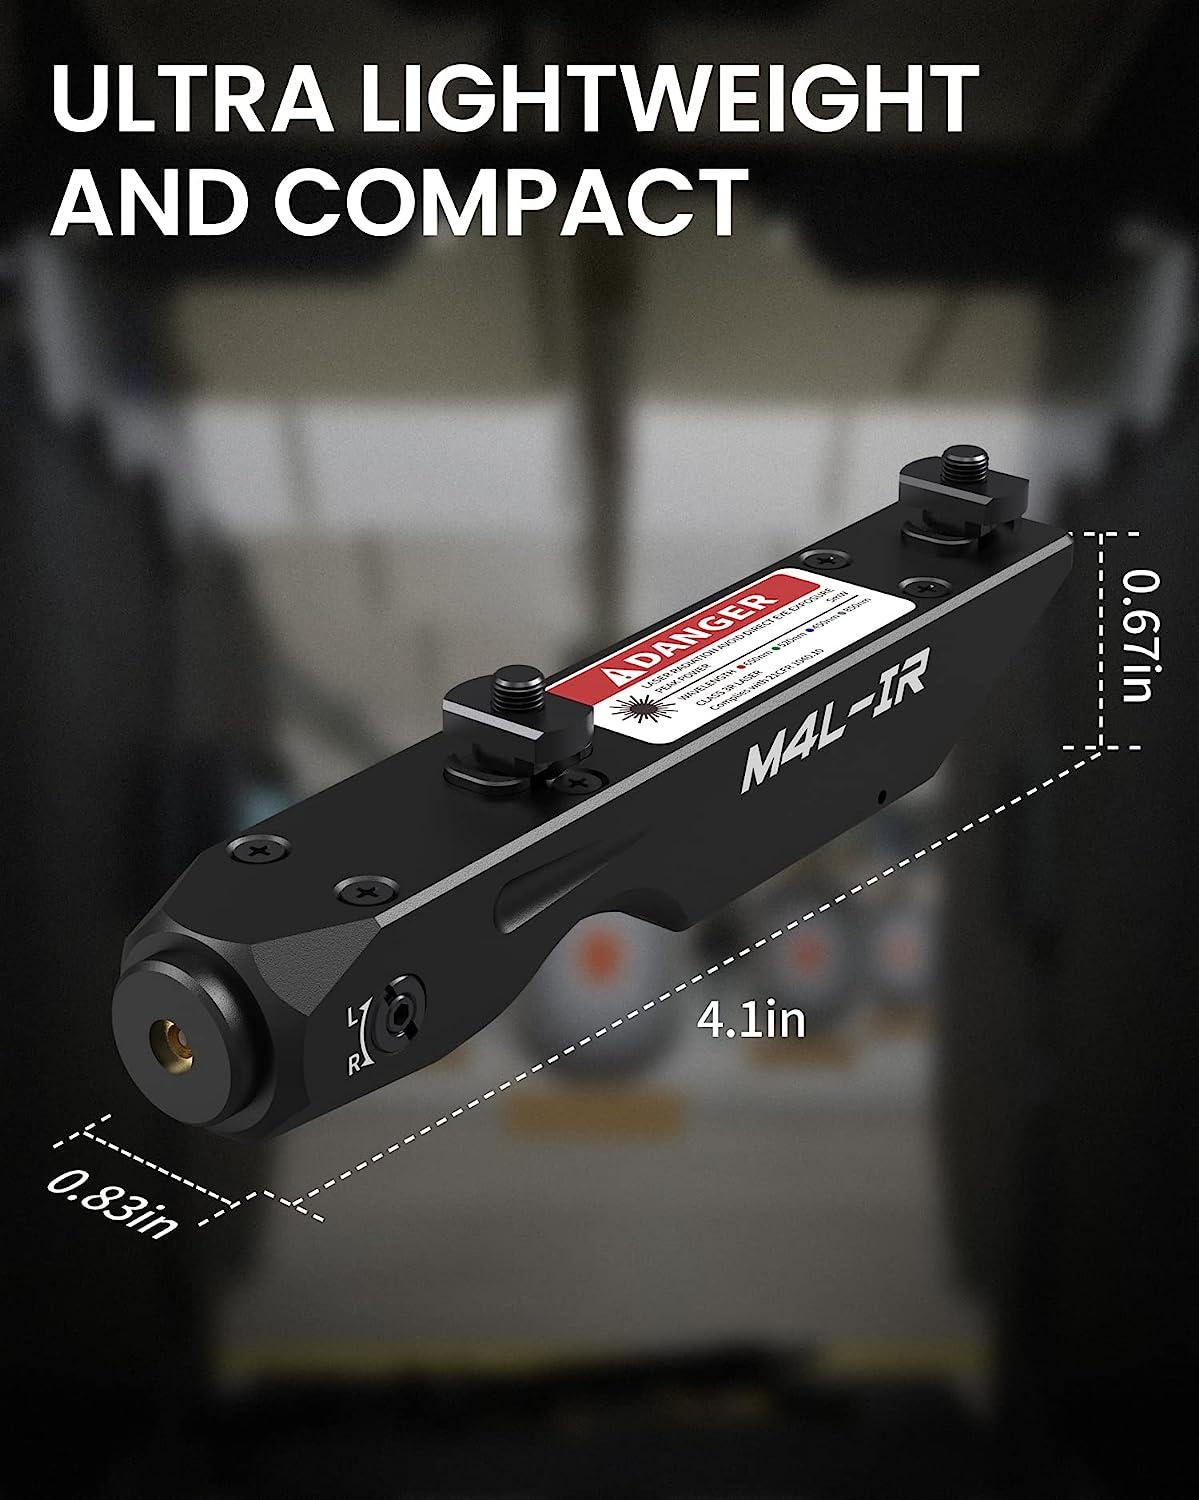  Votatu M4L- IR Laser Sight for Rifle Compatible with